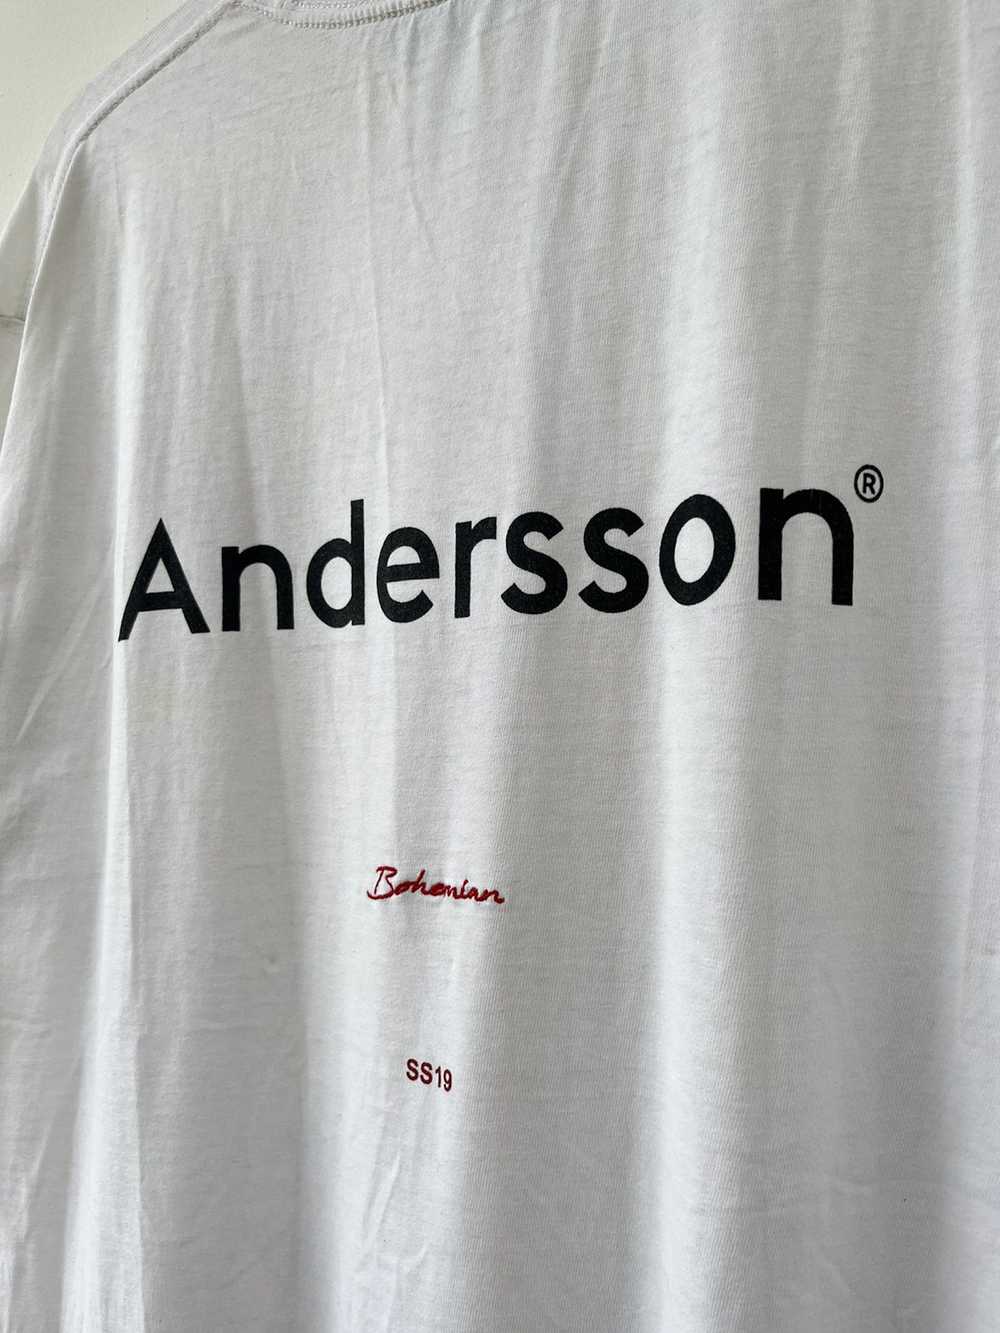 Andersson Bell ANDERSON BELL SS19 ‘BOHEMIAN’ TEE - image 2